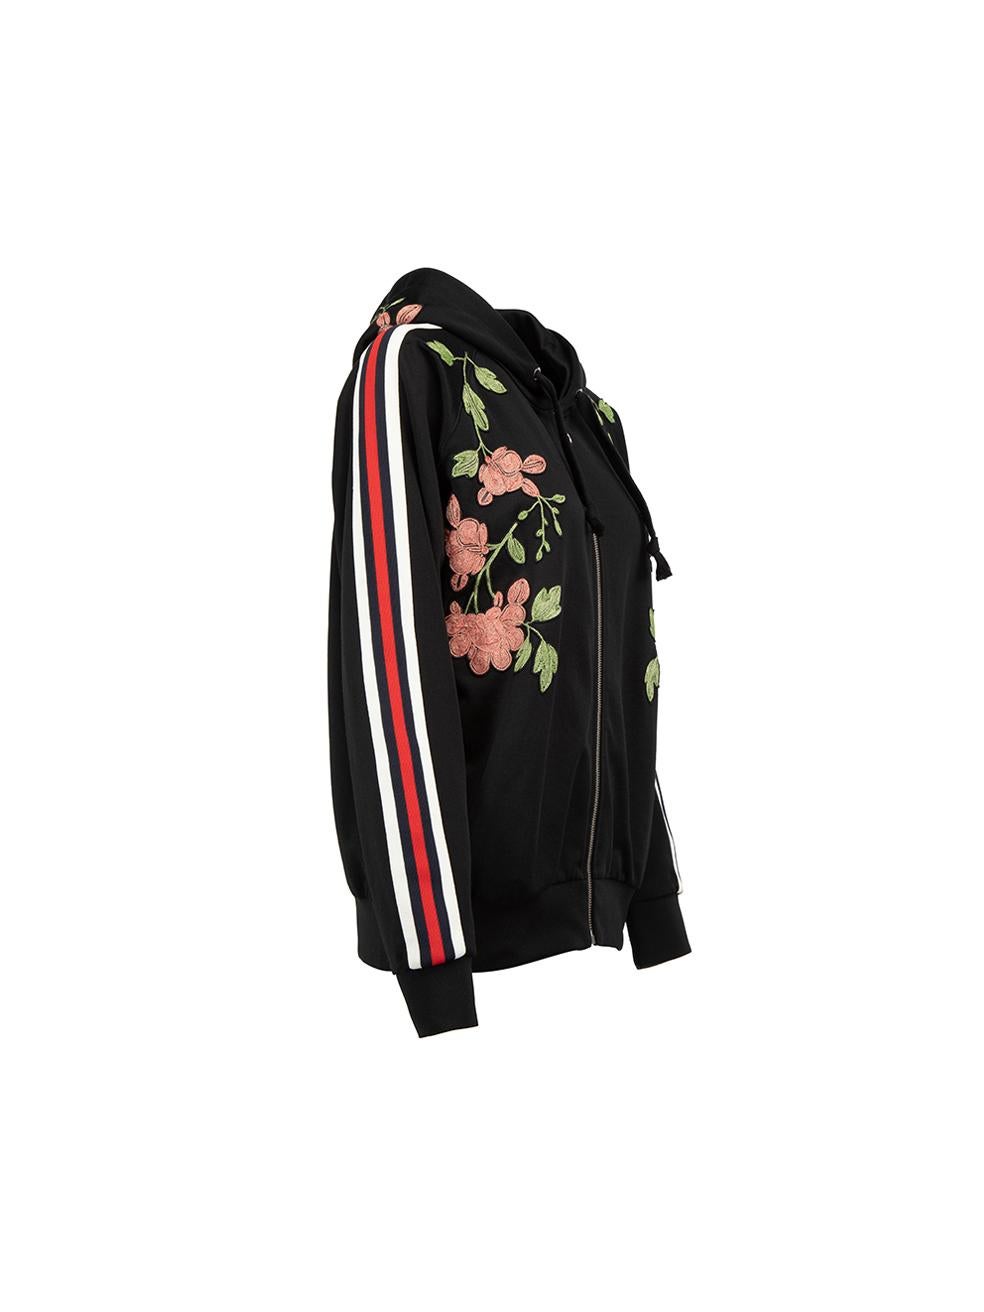 CONDITION is Very good. Hardly any wear to this jacket is evident on this Gucci designer resale item. 



Details


Black

Polyester

Track jacket

Floral embroidered accent

Striped detail on sleeves

Hooded with drawstring

Front zip